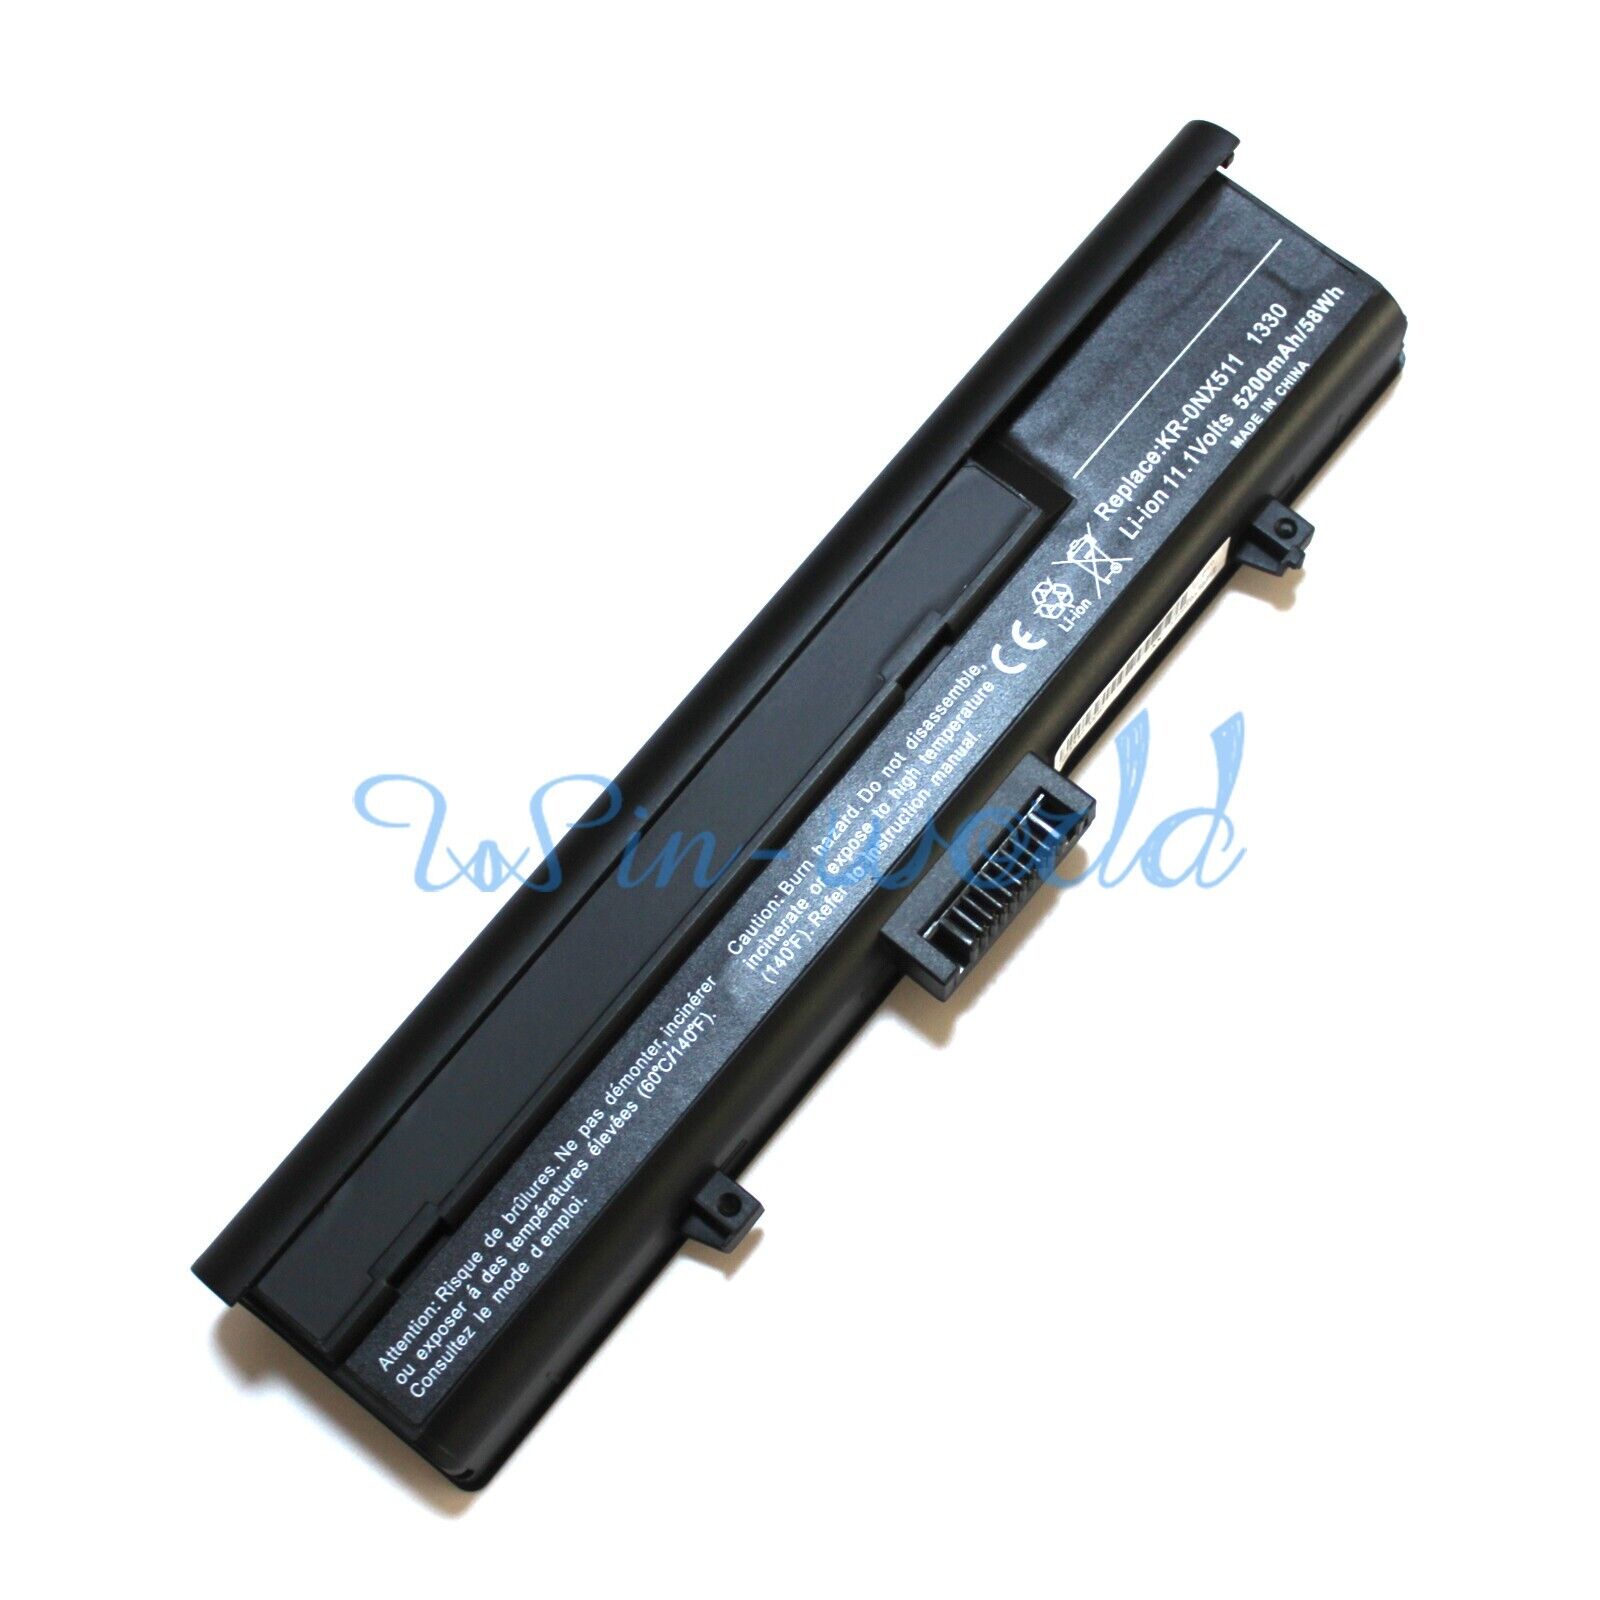 Battery for Dell XPS M1330 M1350 Inspiron 1318 312-0566 312-0739 451-10528 TX826